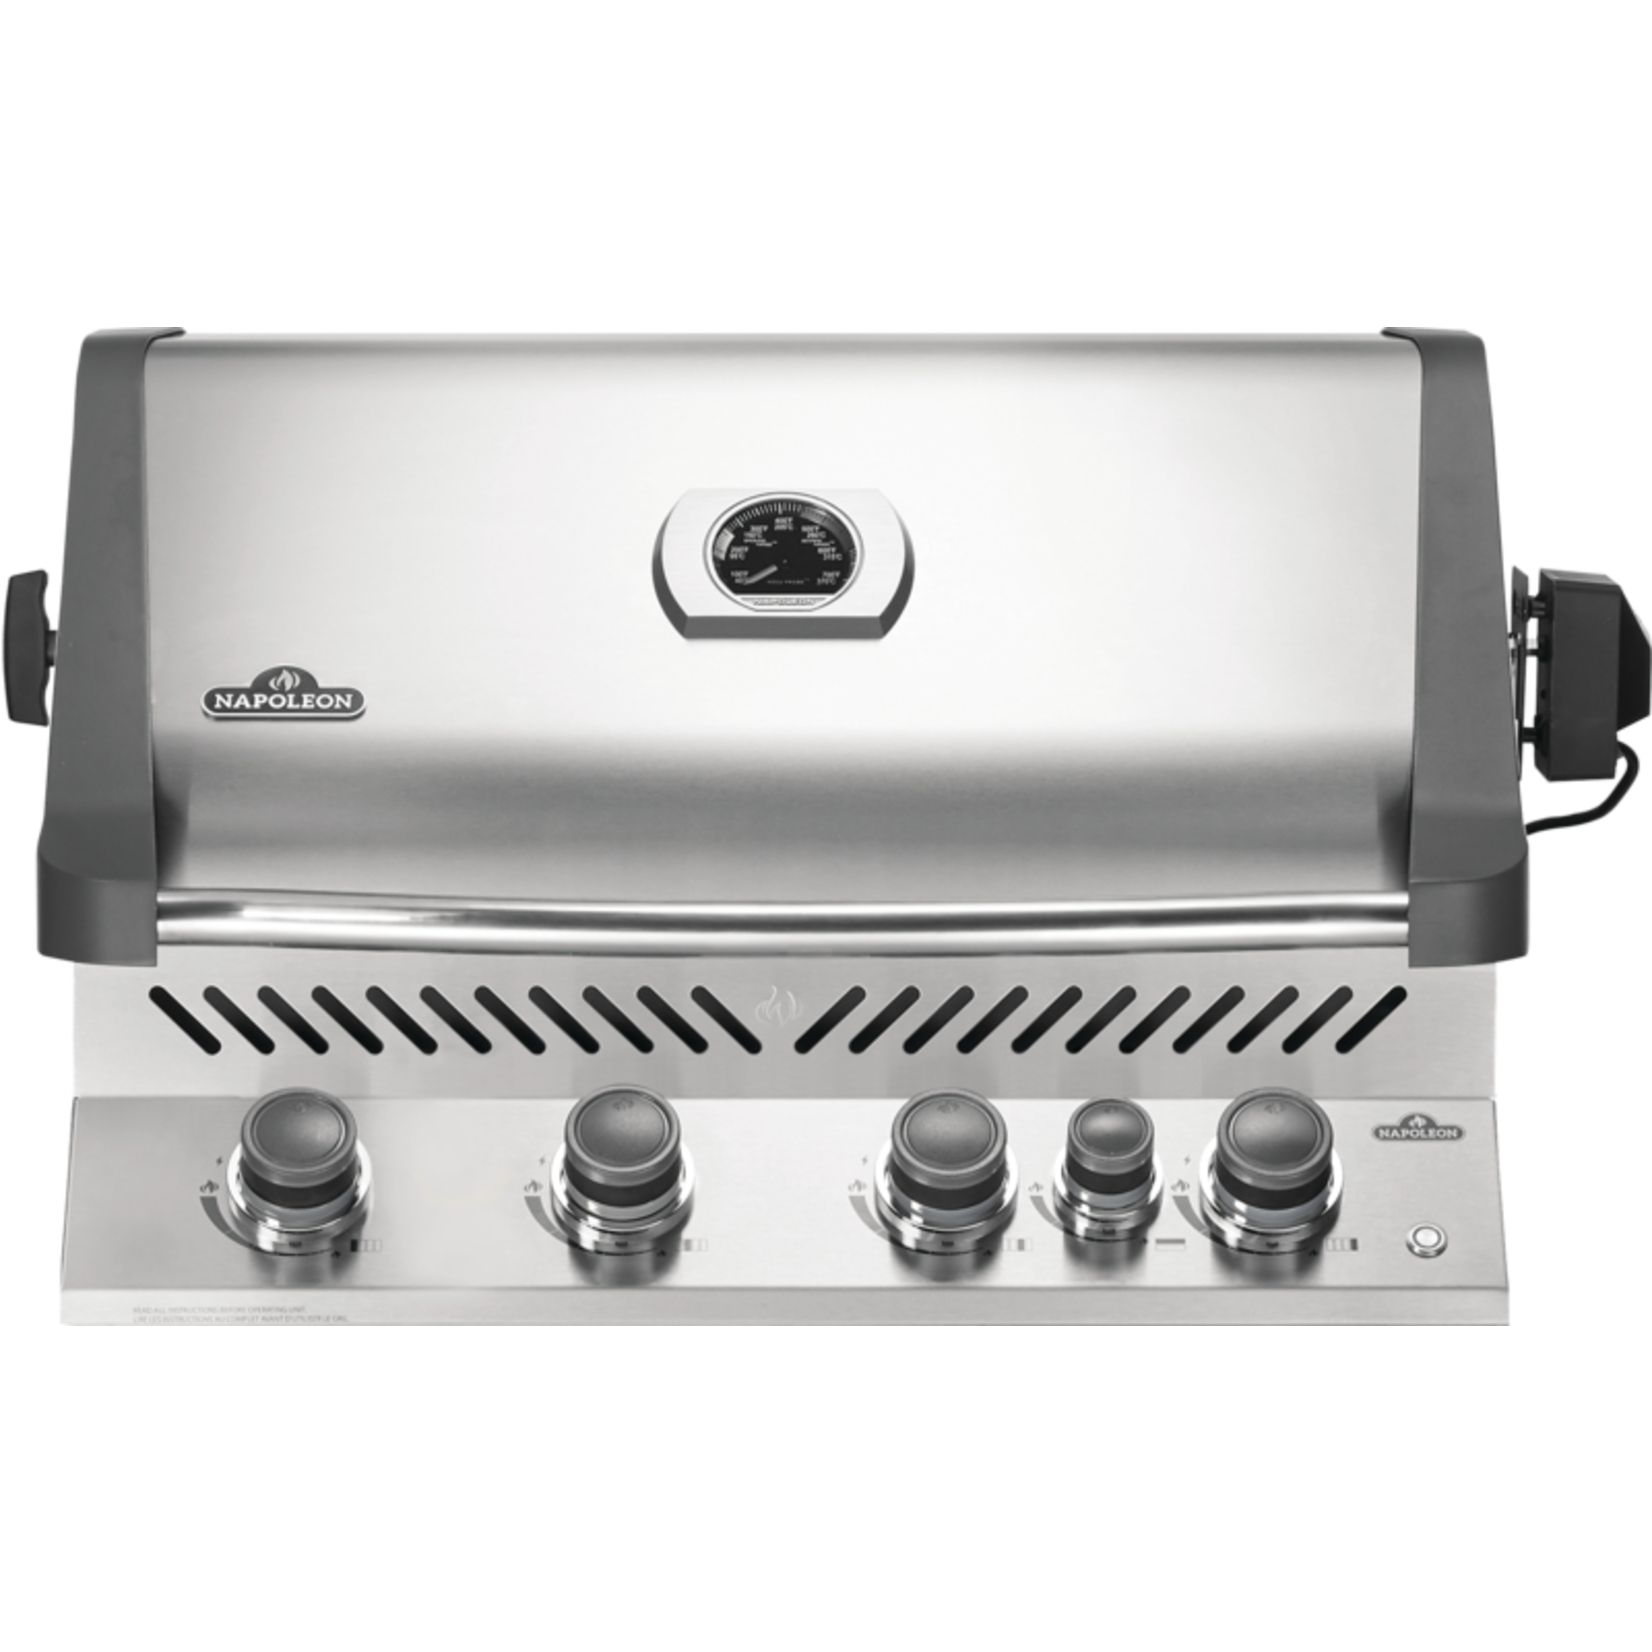 Napoleon Built-in Prestige® 500 Natural Gas Grill Head with Infrared Rear Burner, Stainless Steel